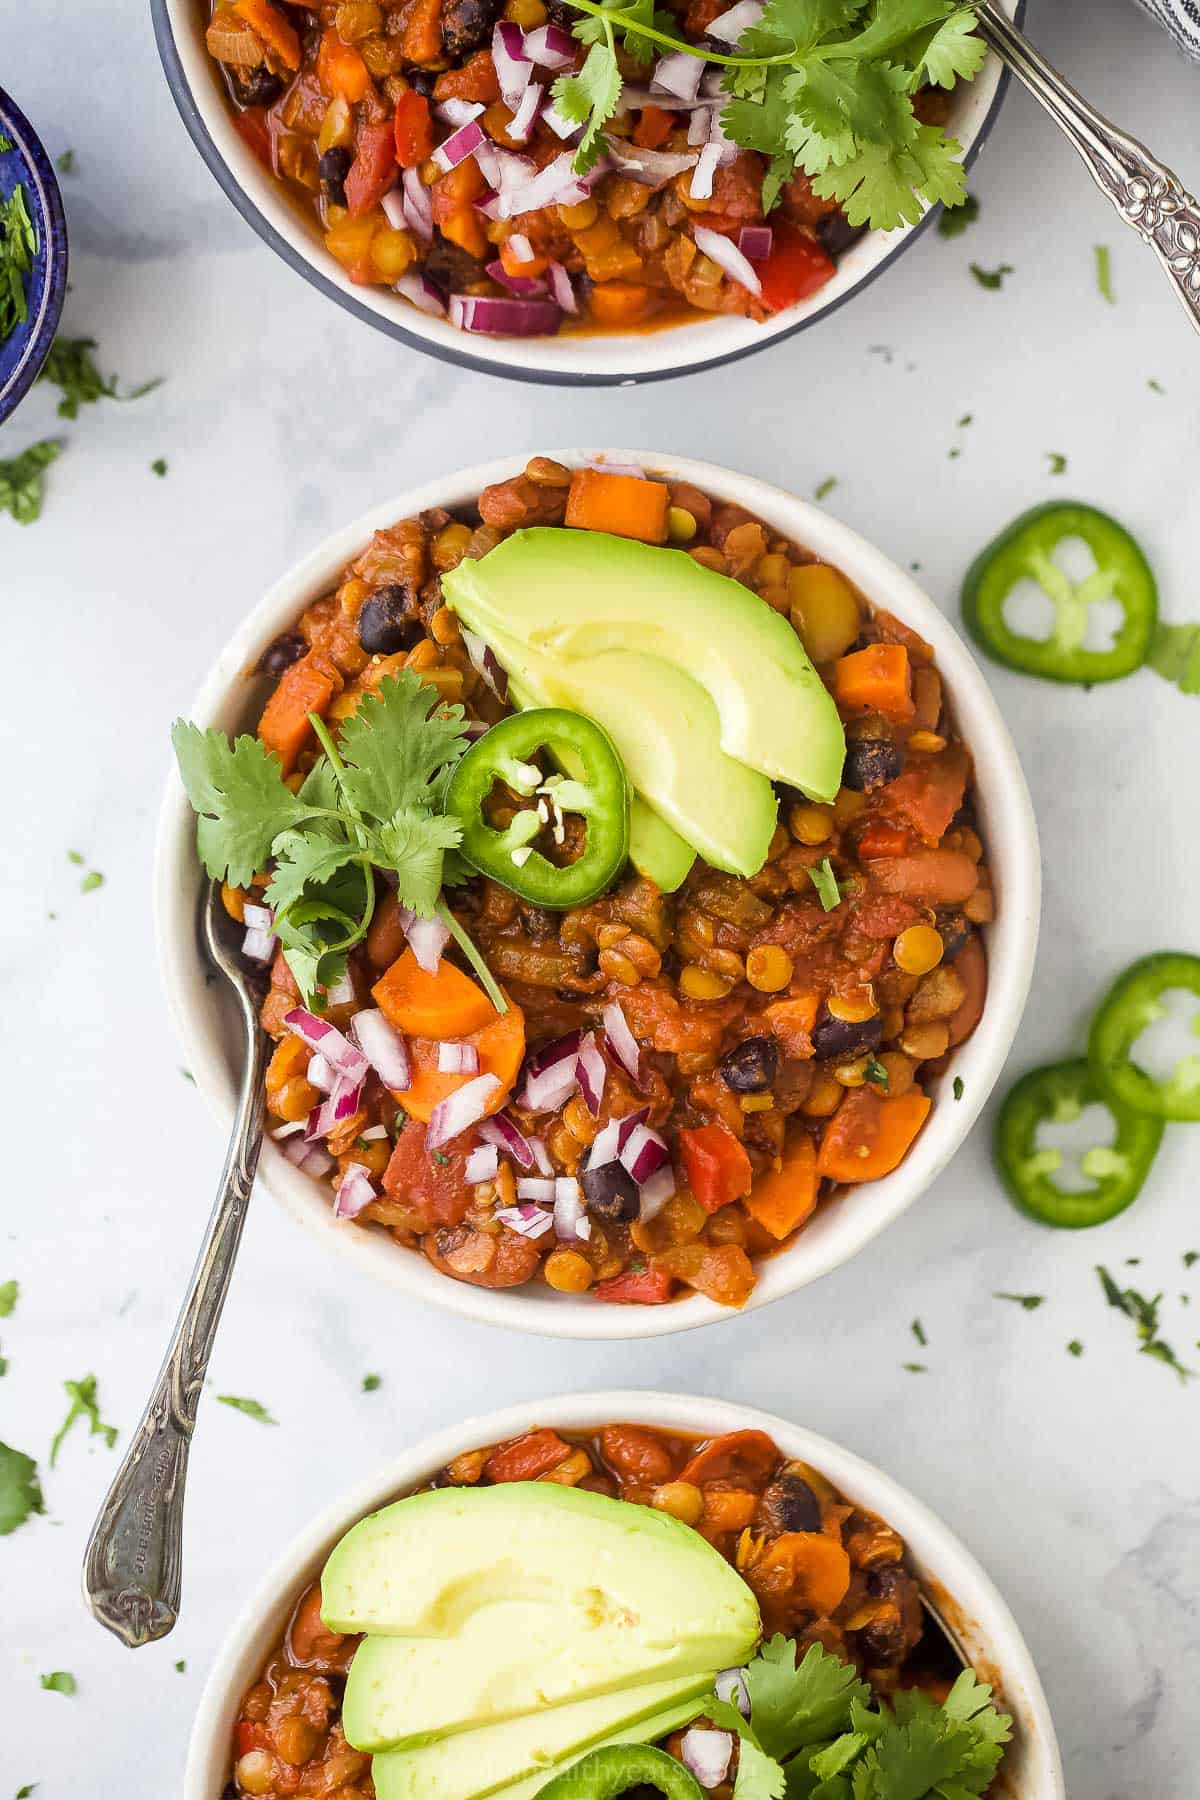 Vegetarian lentil chili in a bowl with toppings.